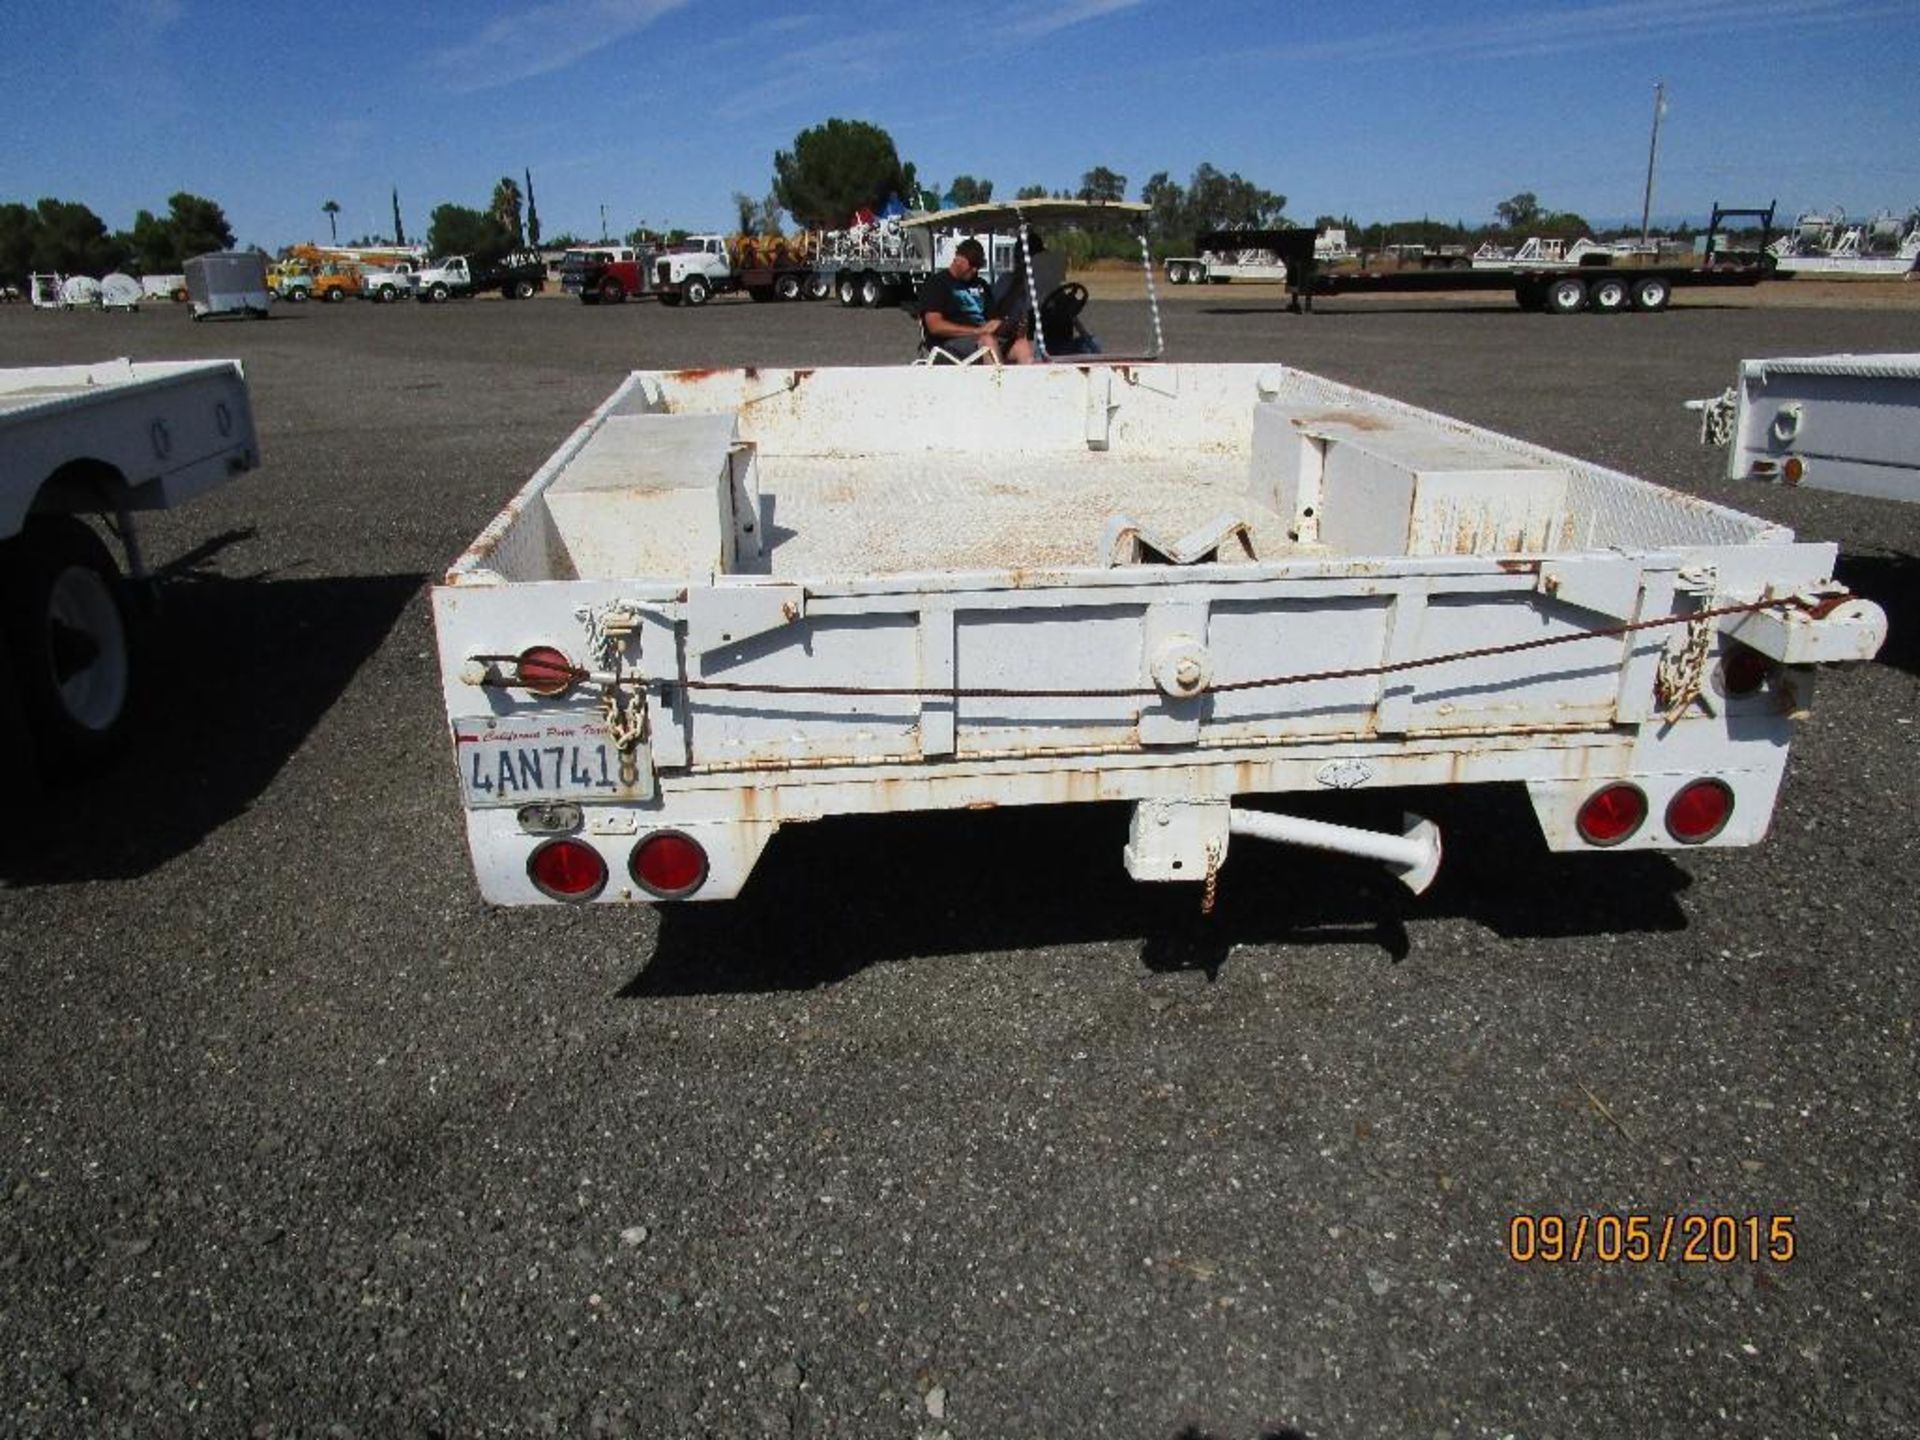 VIN 3139 LIC# 4AN7418 GVWR 9000Lbs Pintle Hitch Air Brakes Ratchet Cable Tie Downs Front and Back